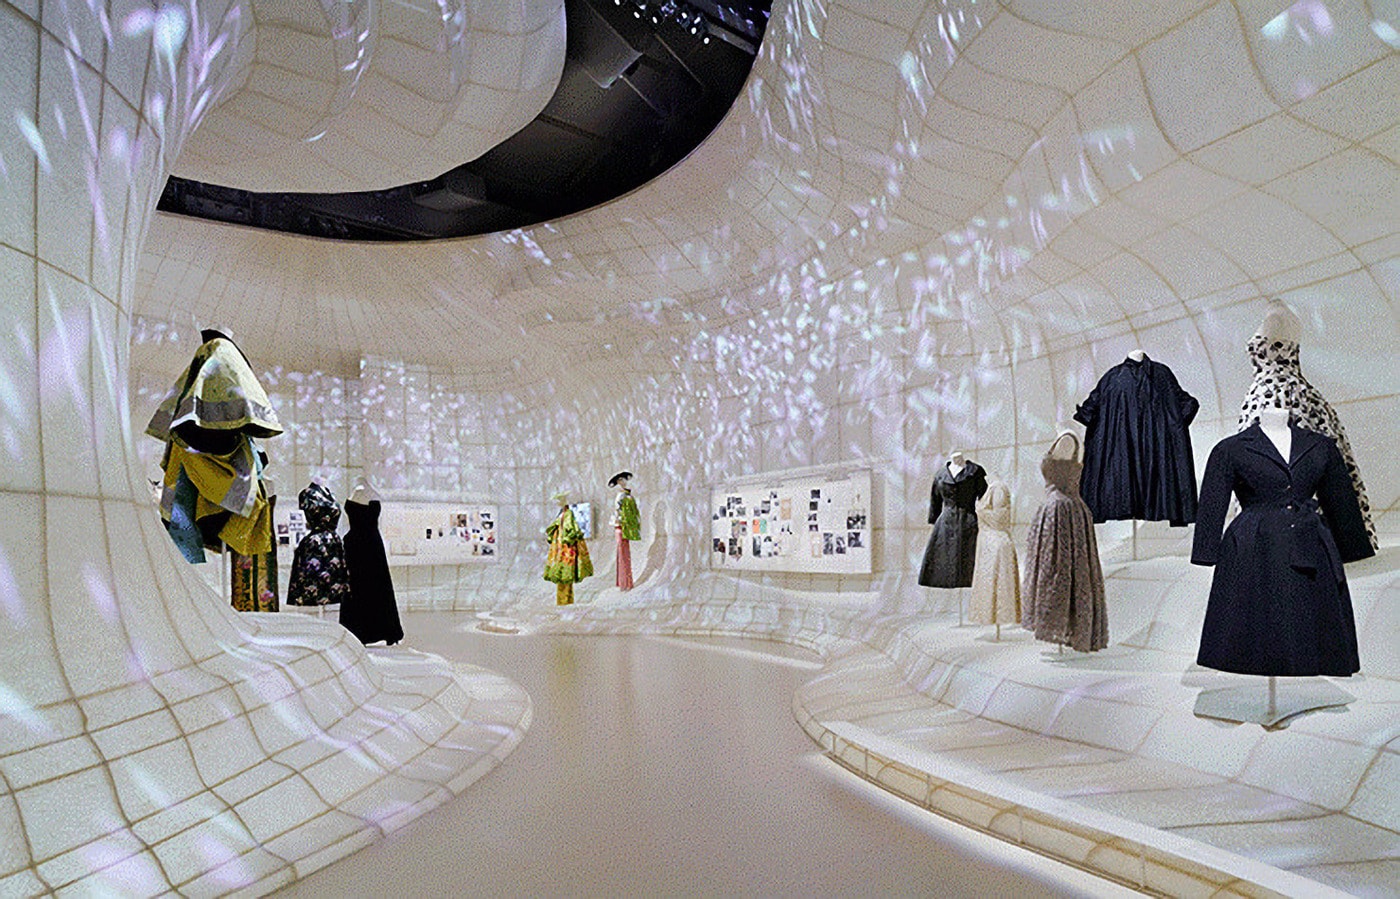 Exhibition “Christian Dior Designer of Dreams” Finally Opening at 